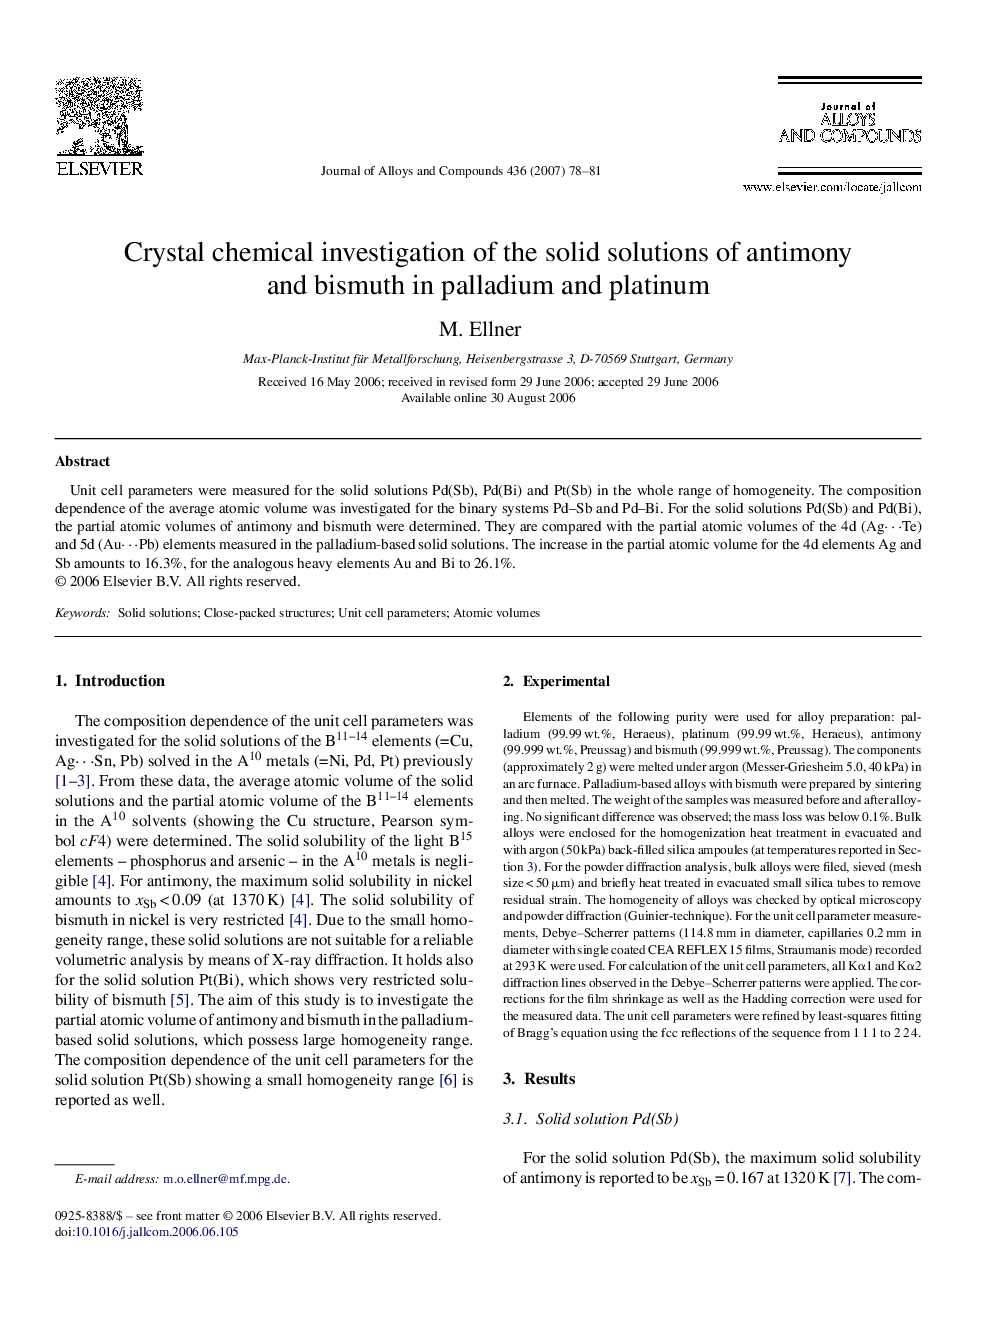 Crystal chemical investigation of the solid solutions of antimony and bismuth in palladium and platinum